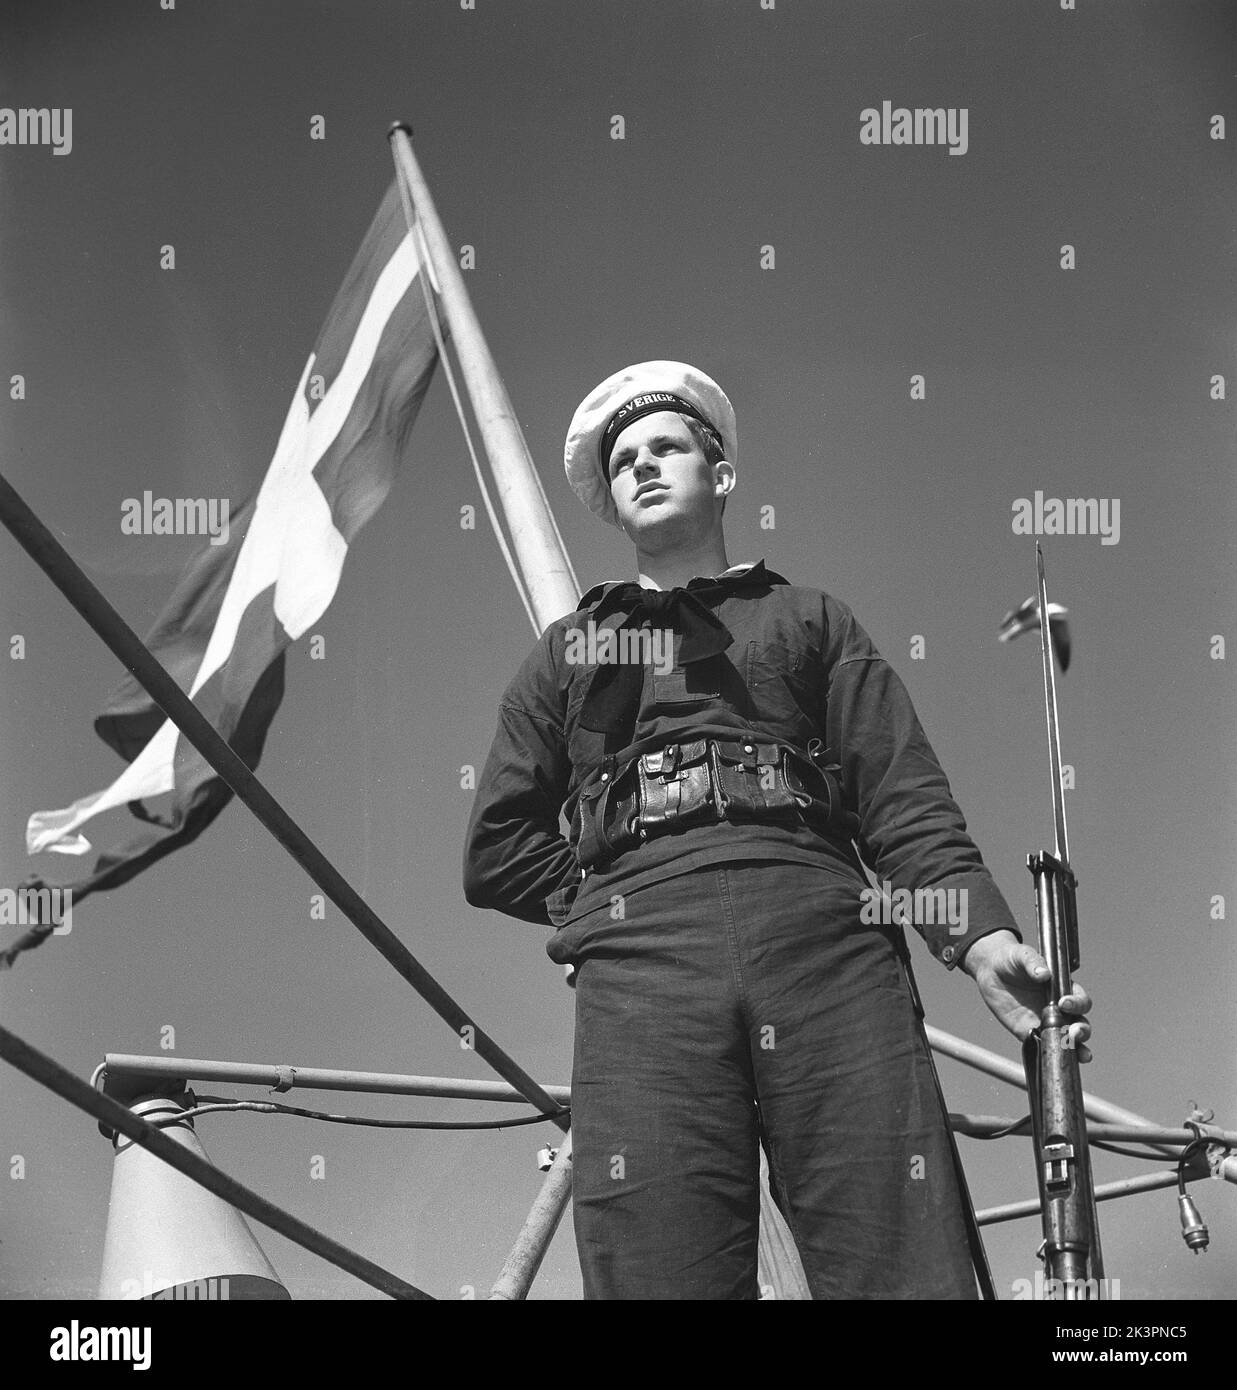 During World war II. The war ship Sverige during navy exercises at sea. Detail of a sailor standing guard on the ship with a rifle in his hand. The swedish naval flag is seen in the background. Sweden june 1940. Kristoffersson ref 141 Stock Photo